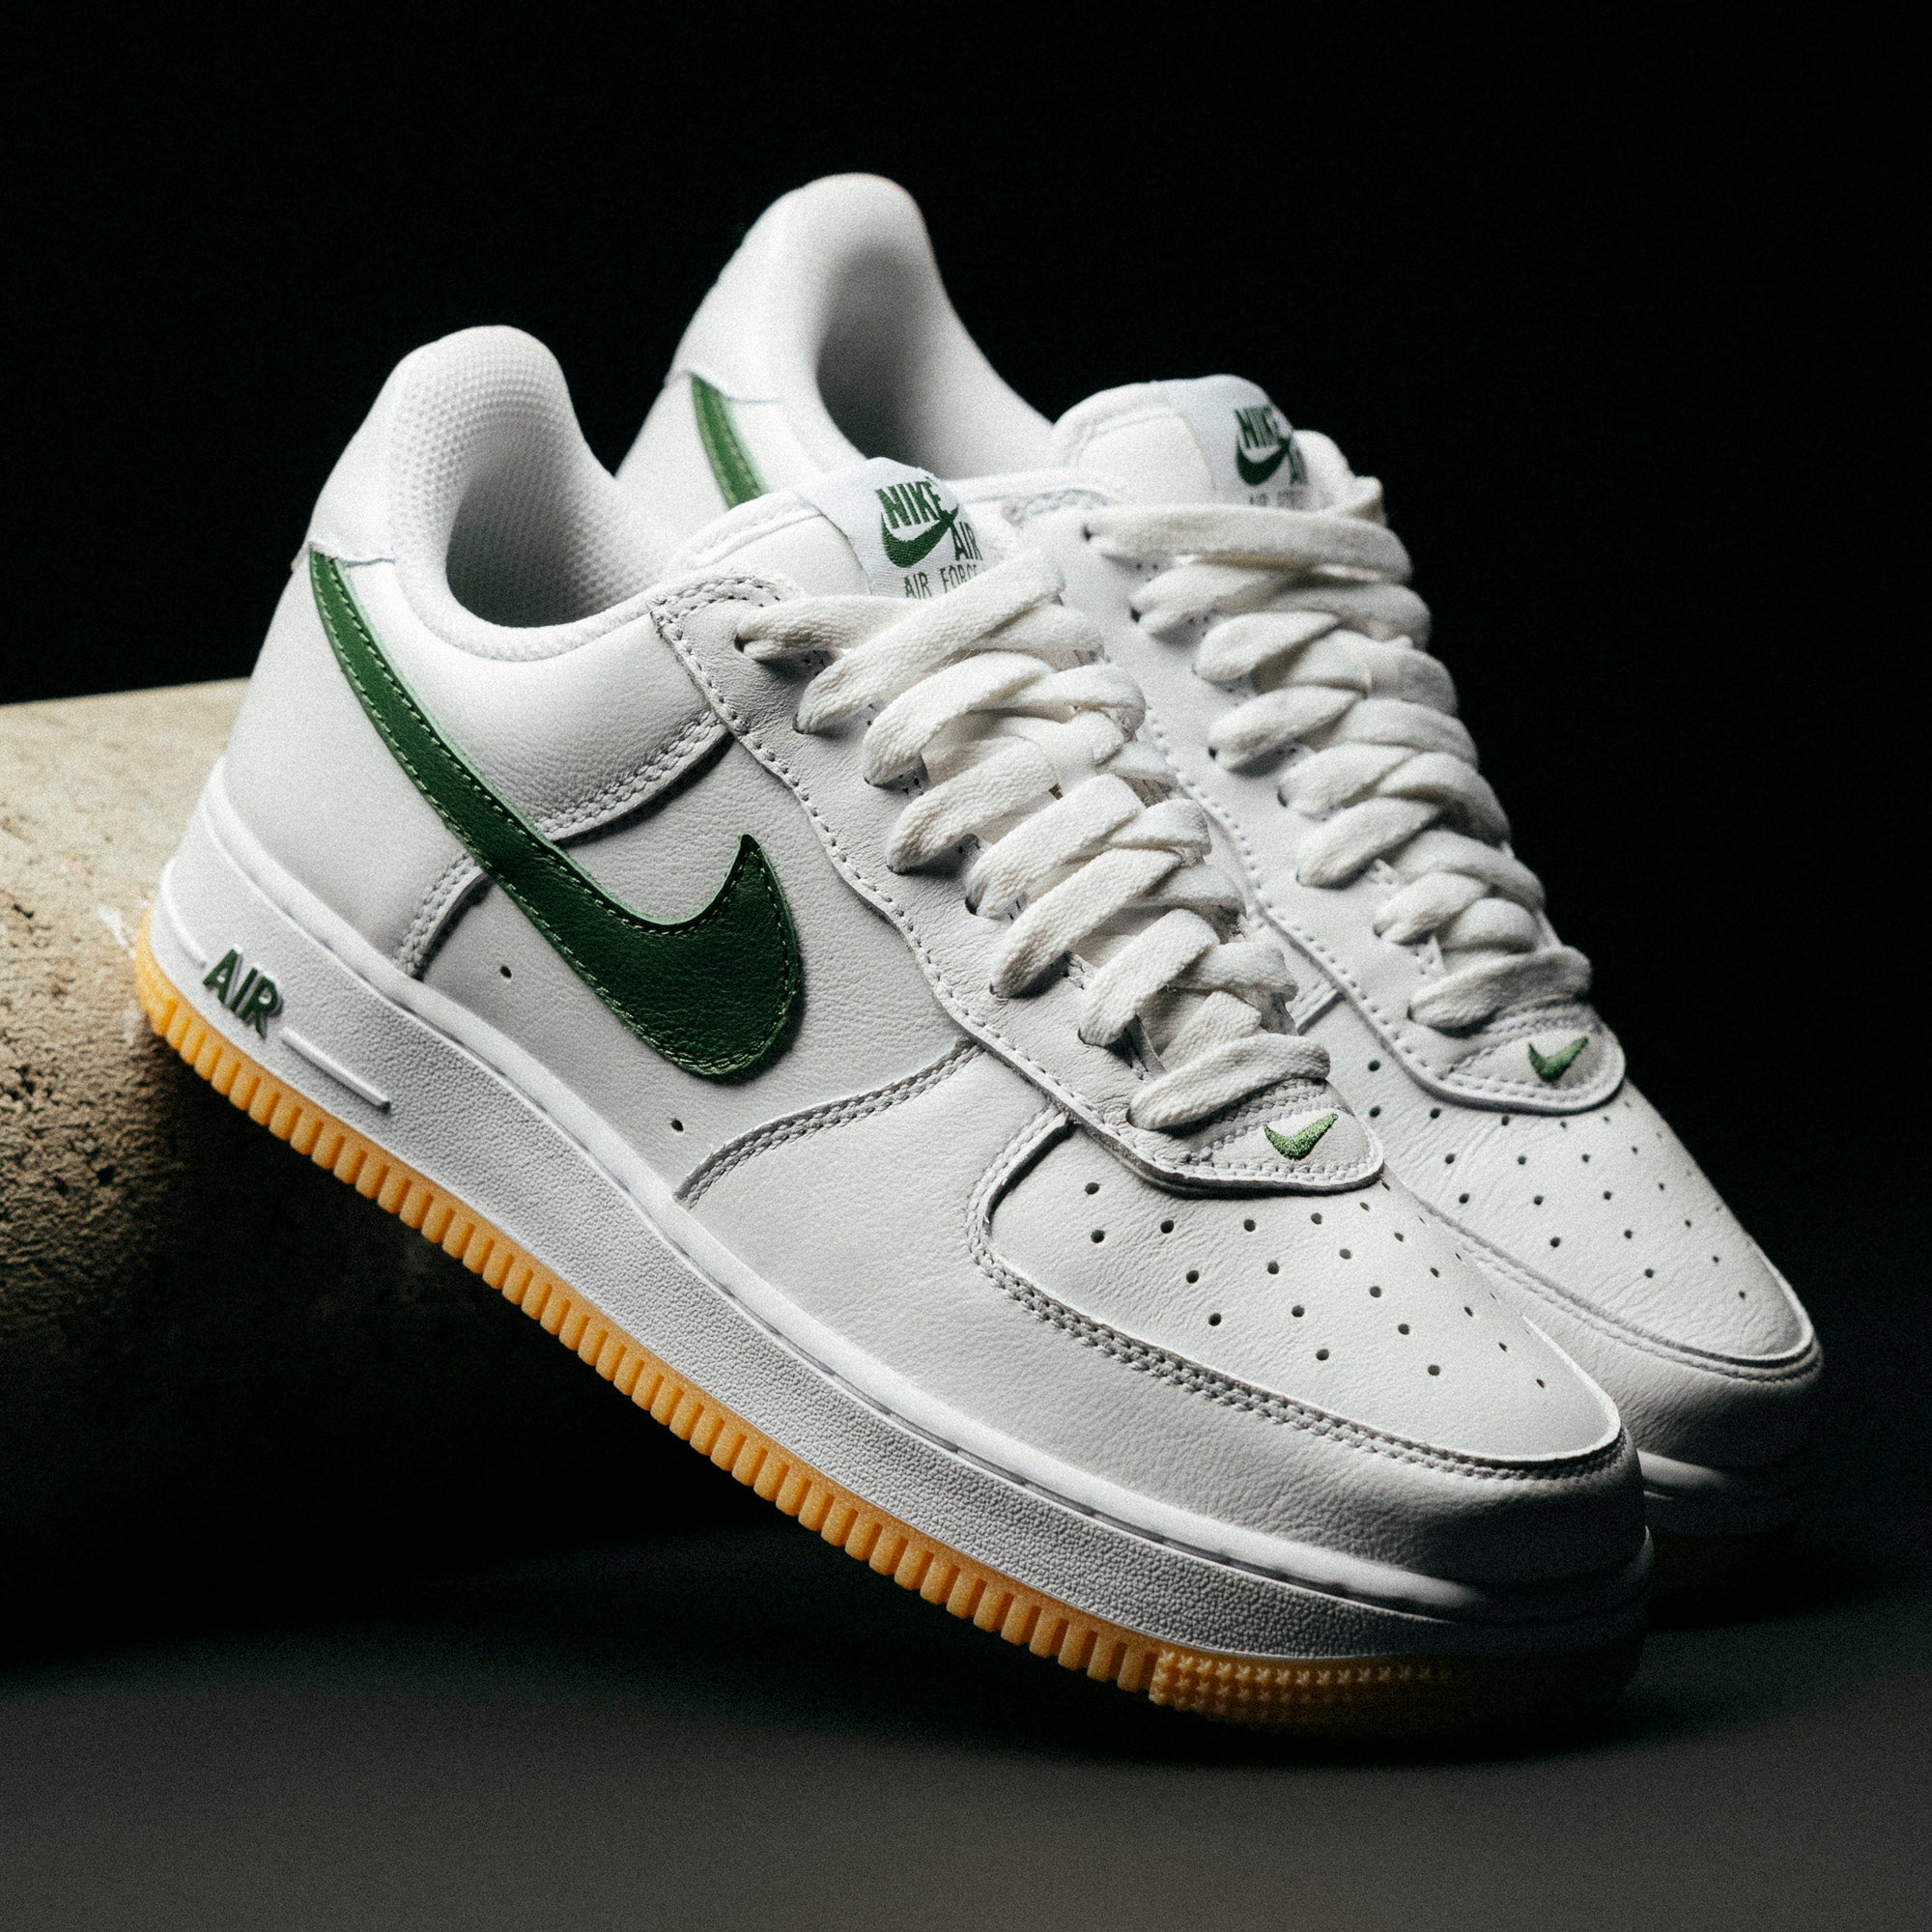 Nike Air Force 1 Low Retro - White/Forest Green